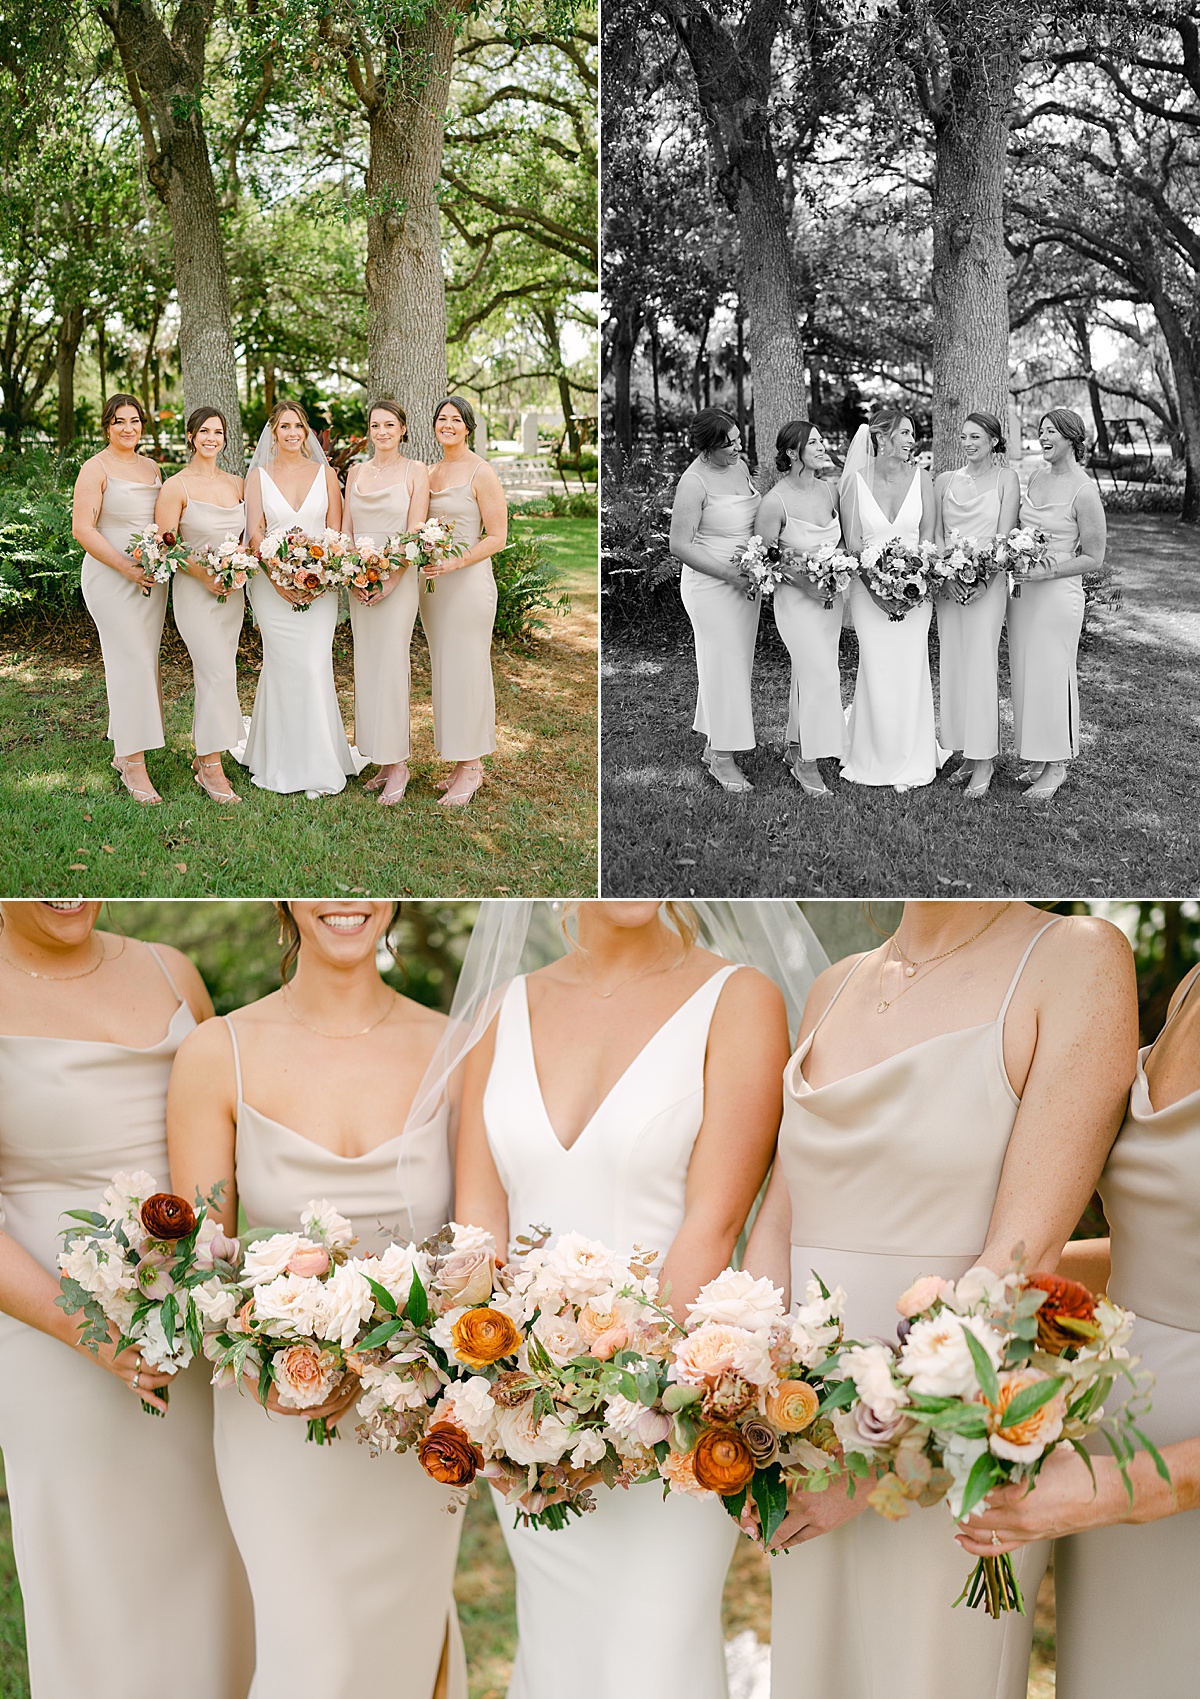 Bride and bridesmaid portraits featuring light champagne simple spaghetti strap bridesmaid dresses and matching bouquets.